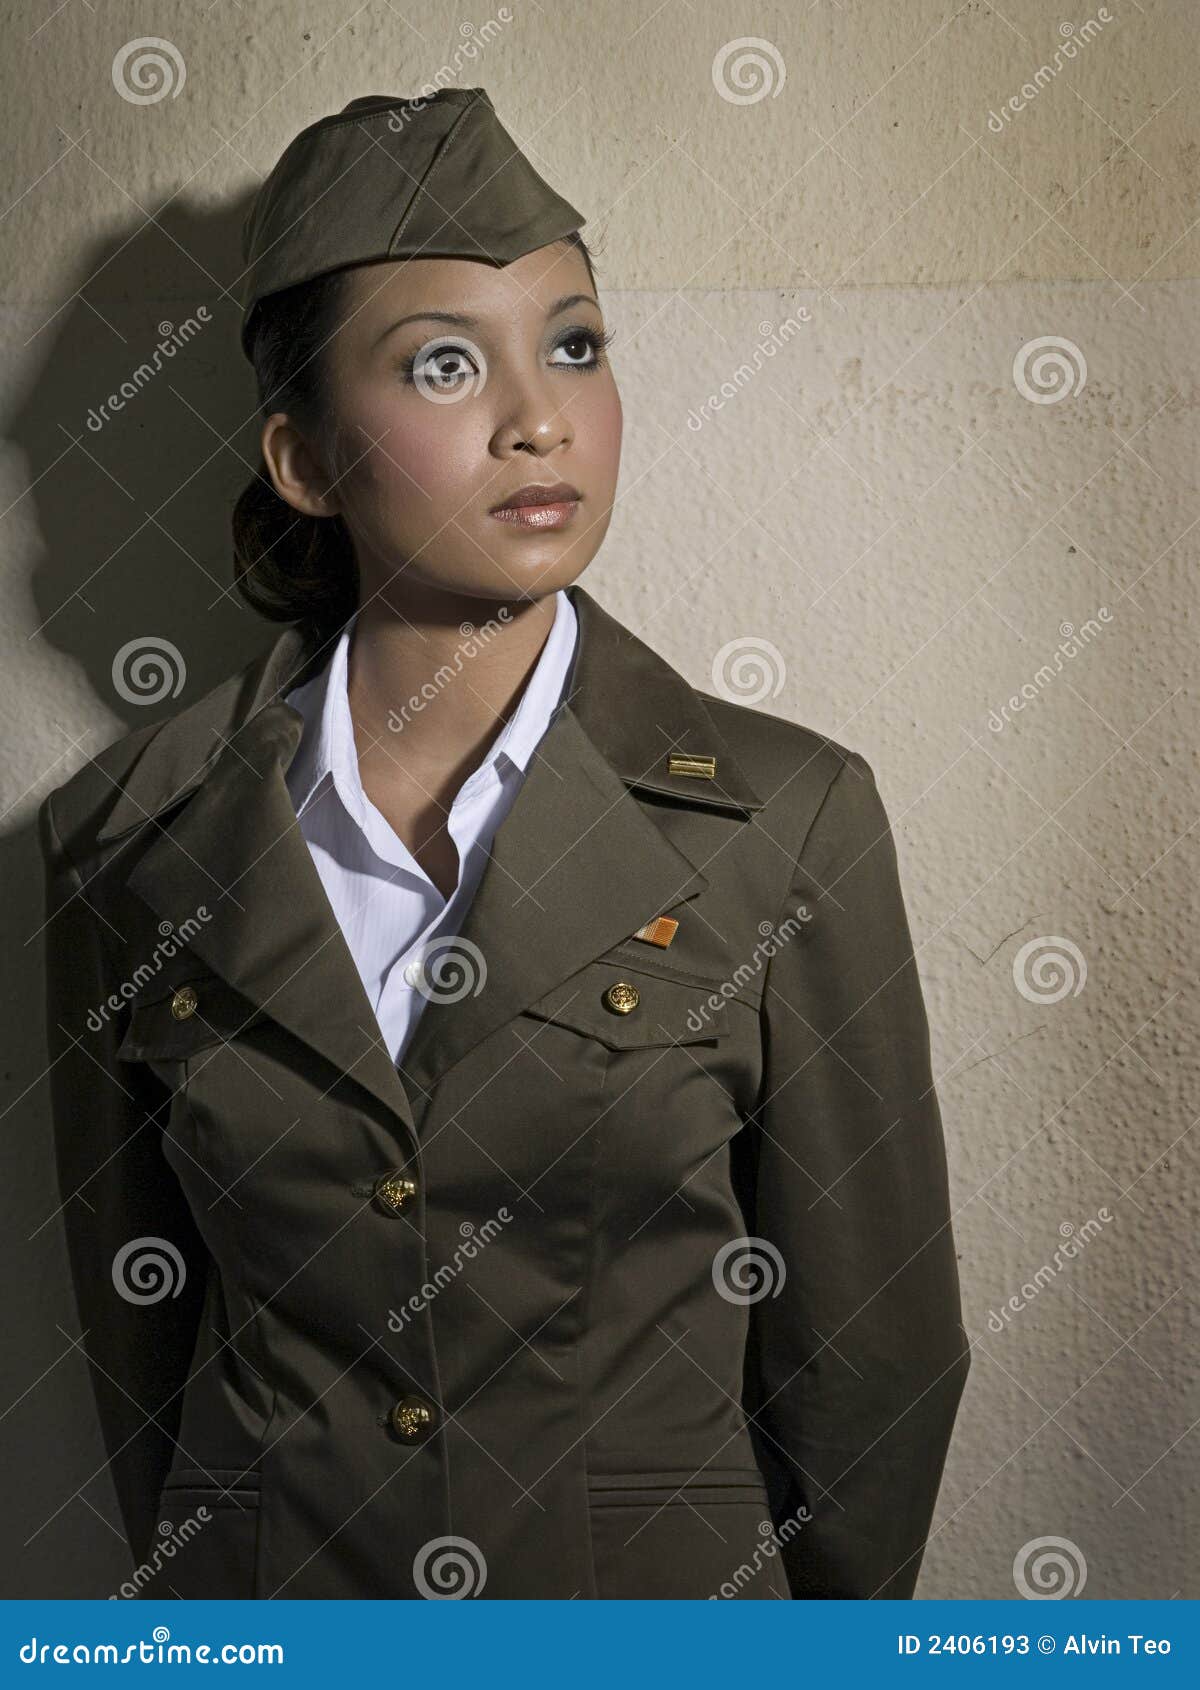 female army personnel